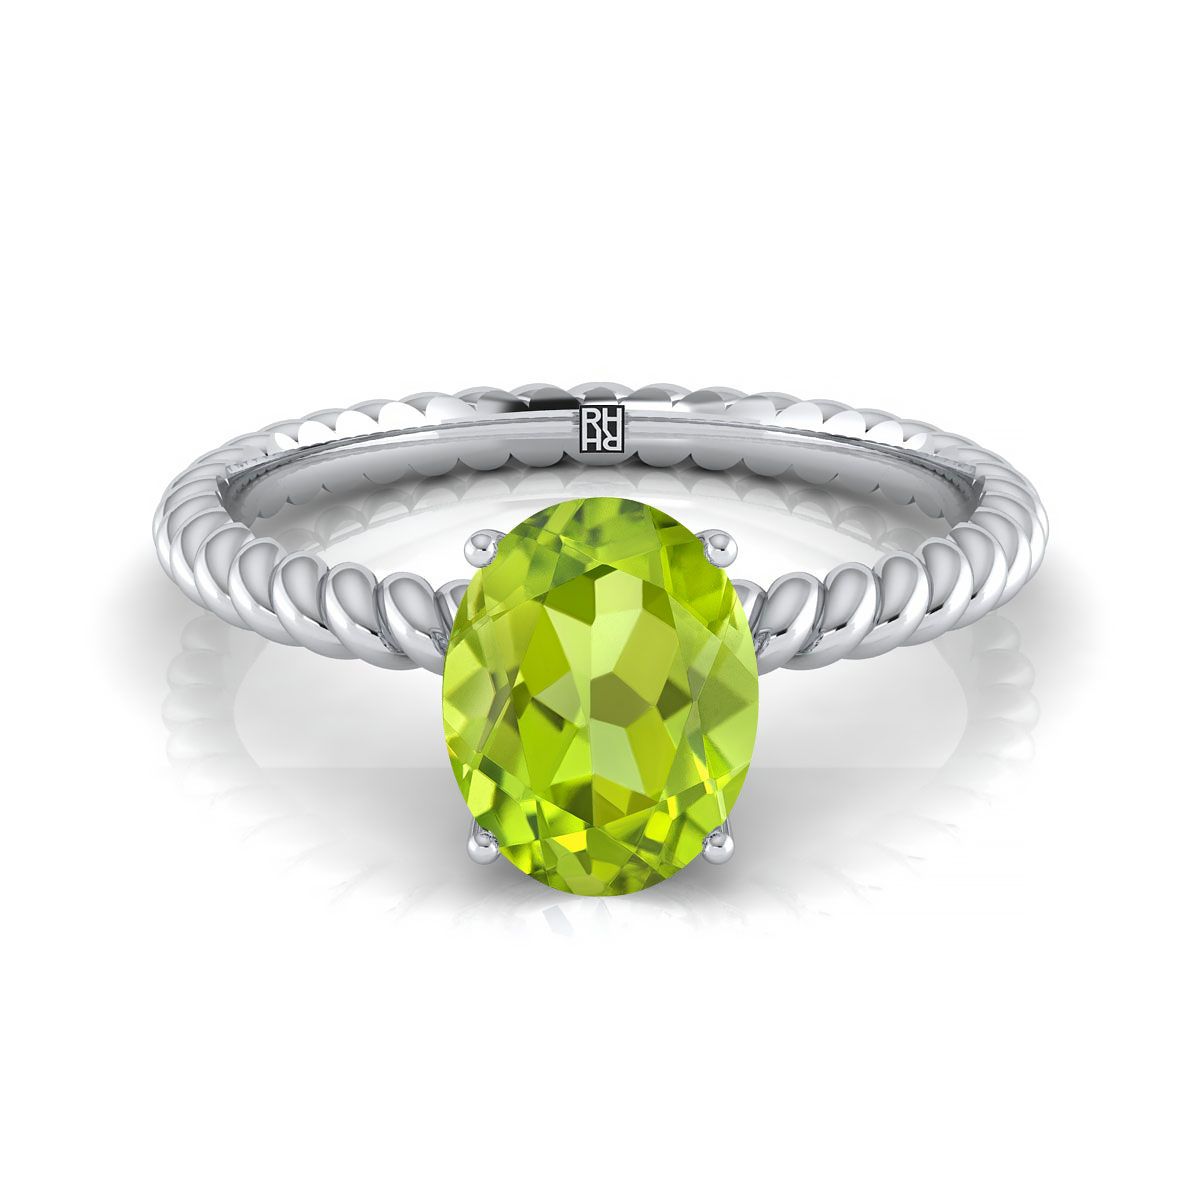 14K White Gold Oval Peridot Twisted Rope Solitaire With Surprize Diamond Engagement Ring